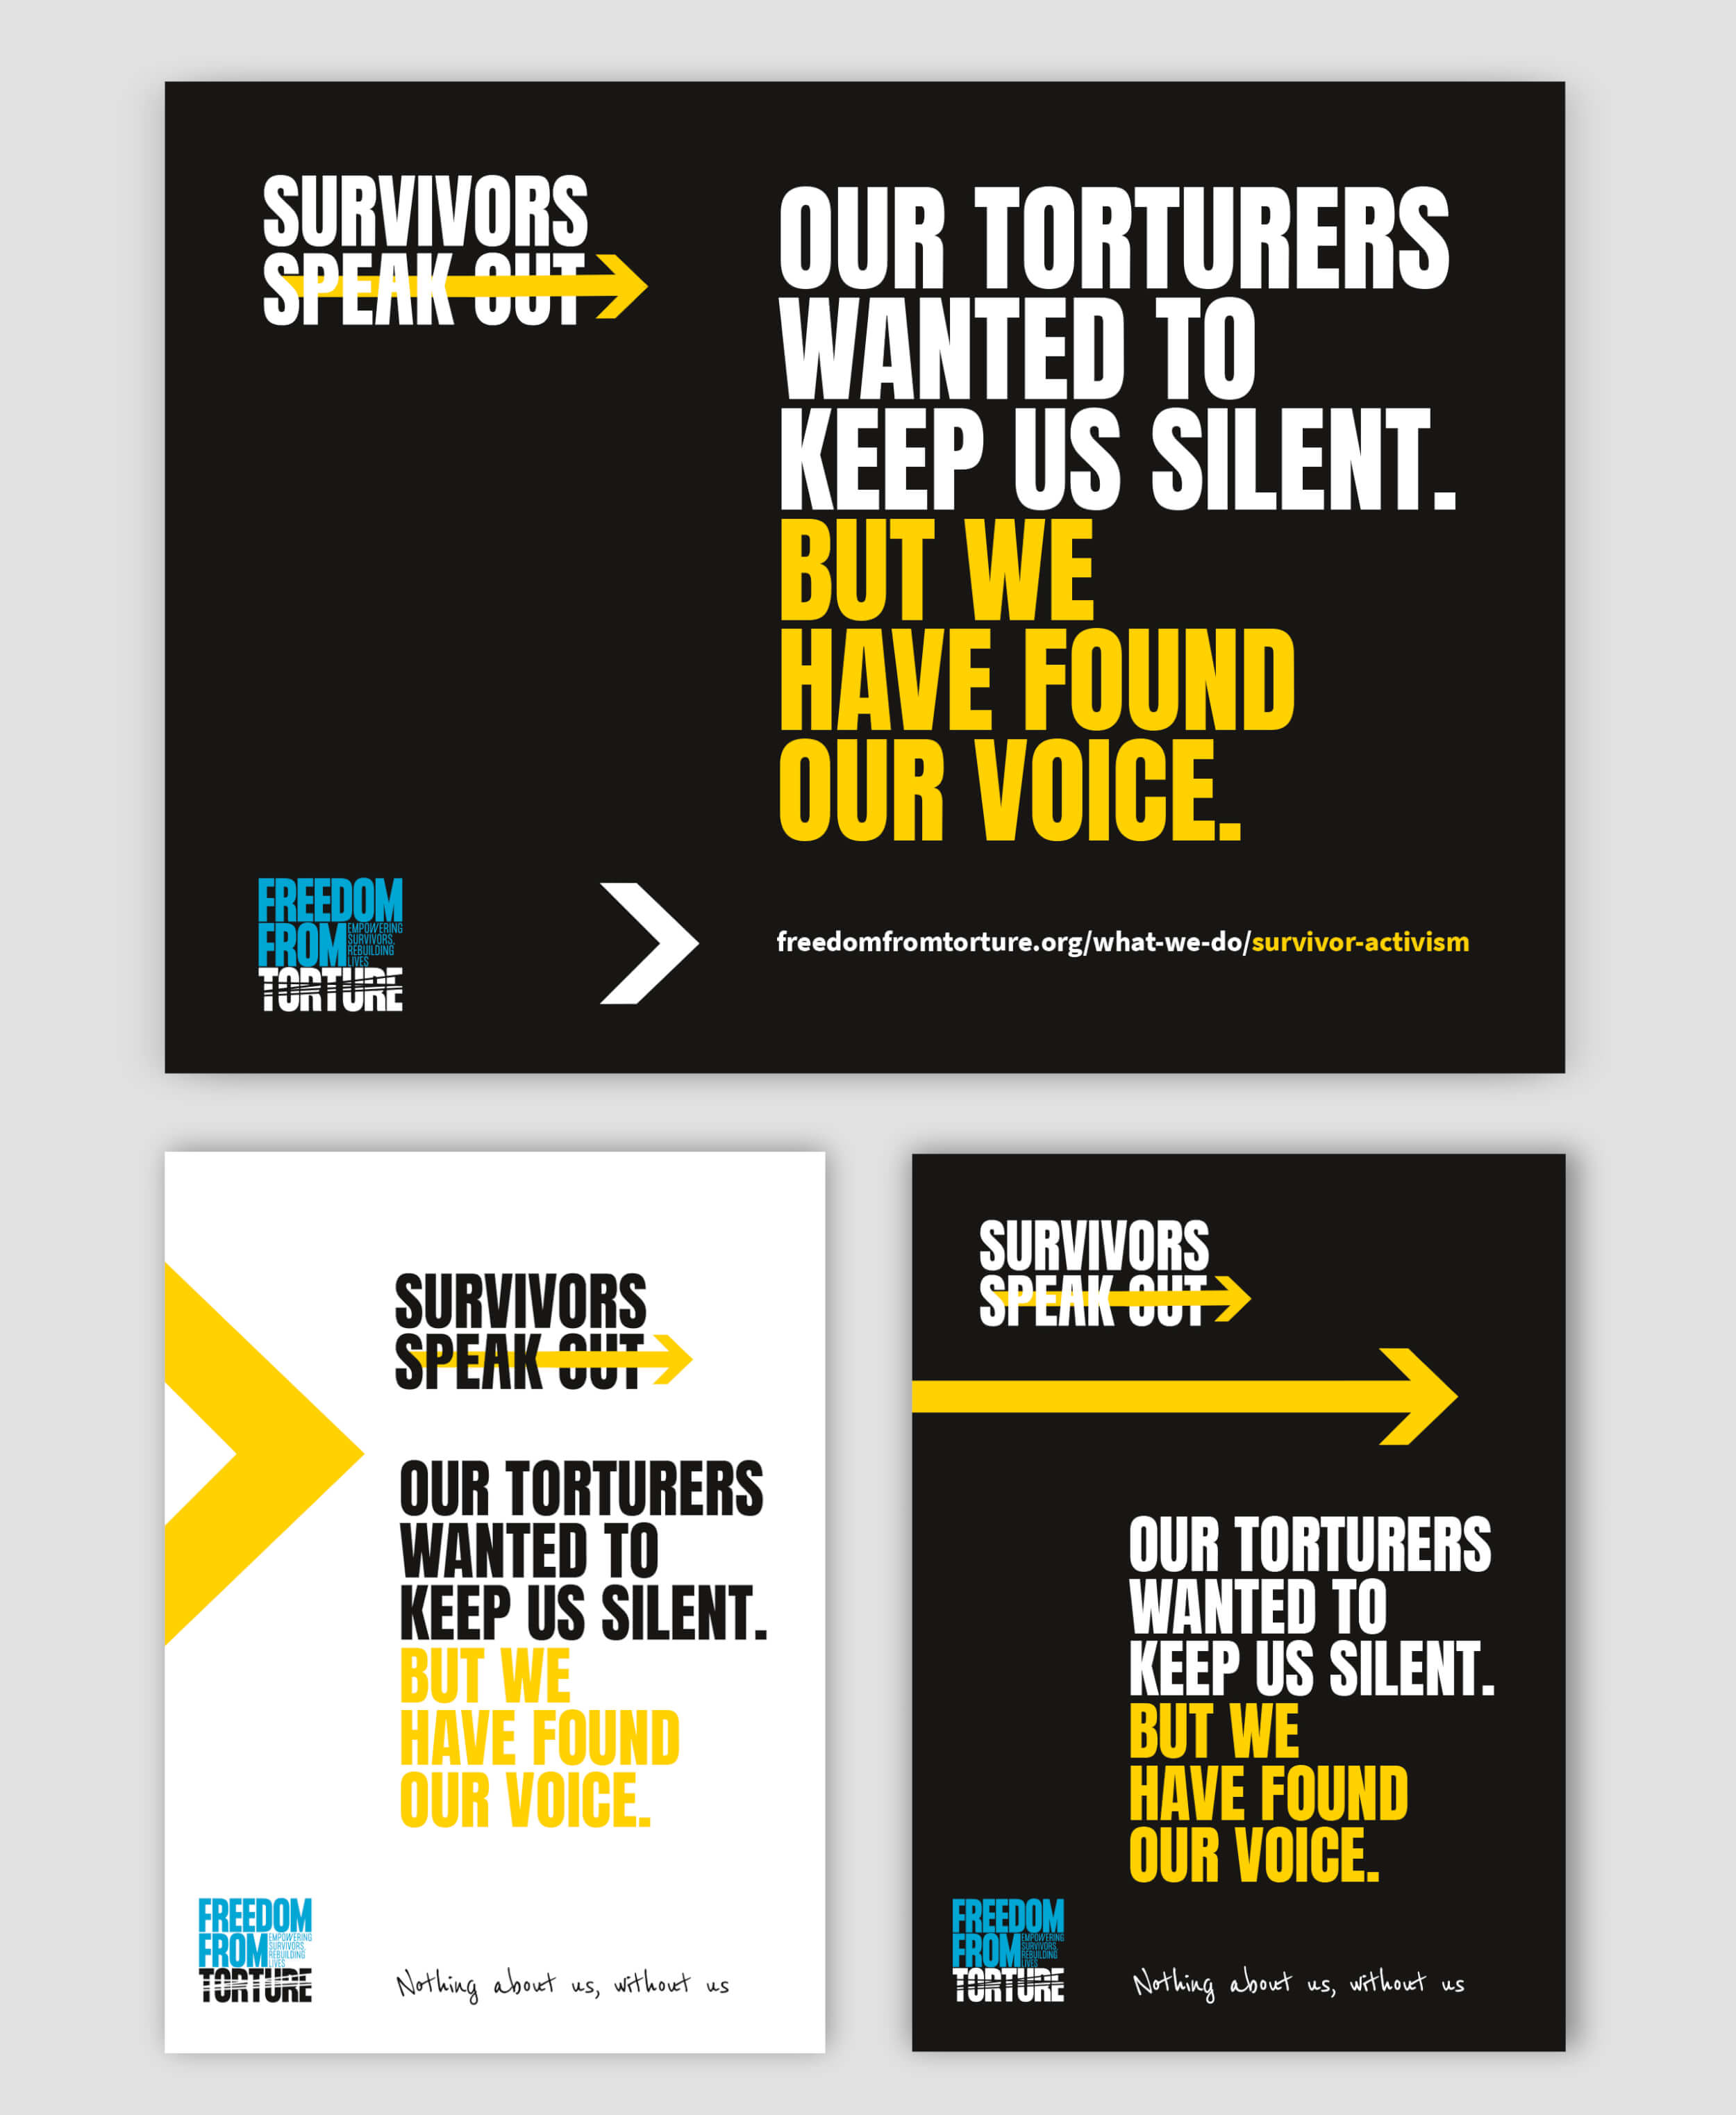 Survivors Speak OUT charity brand awareness posters